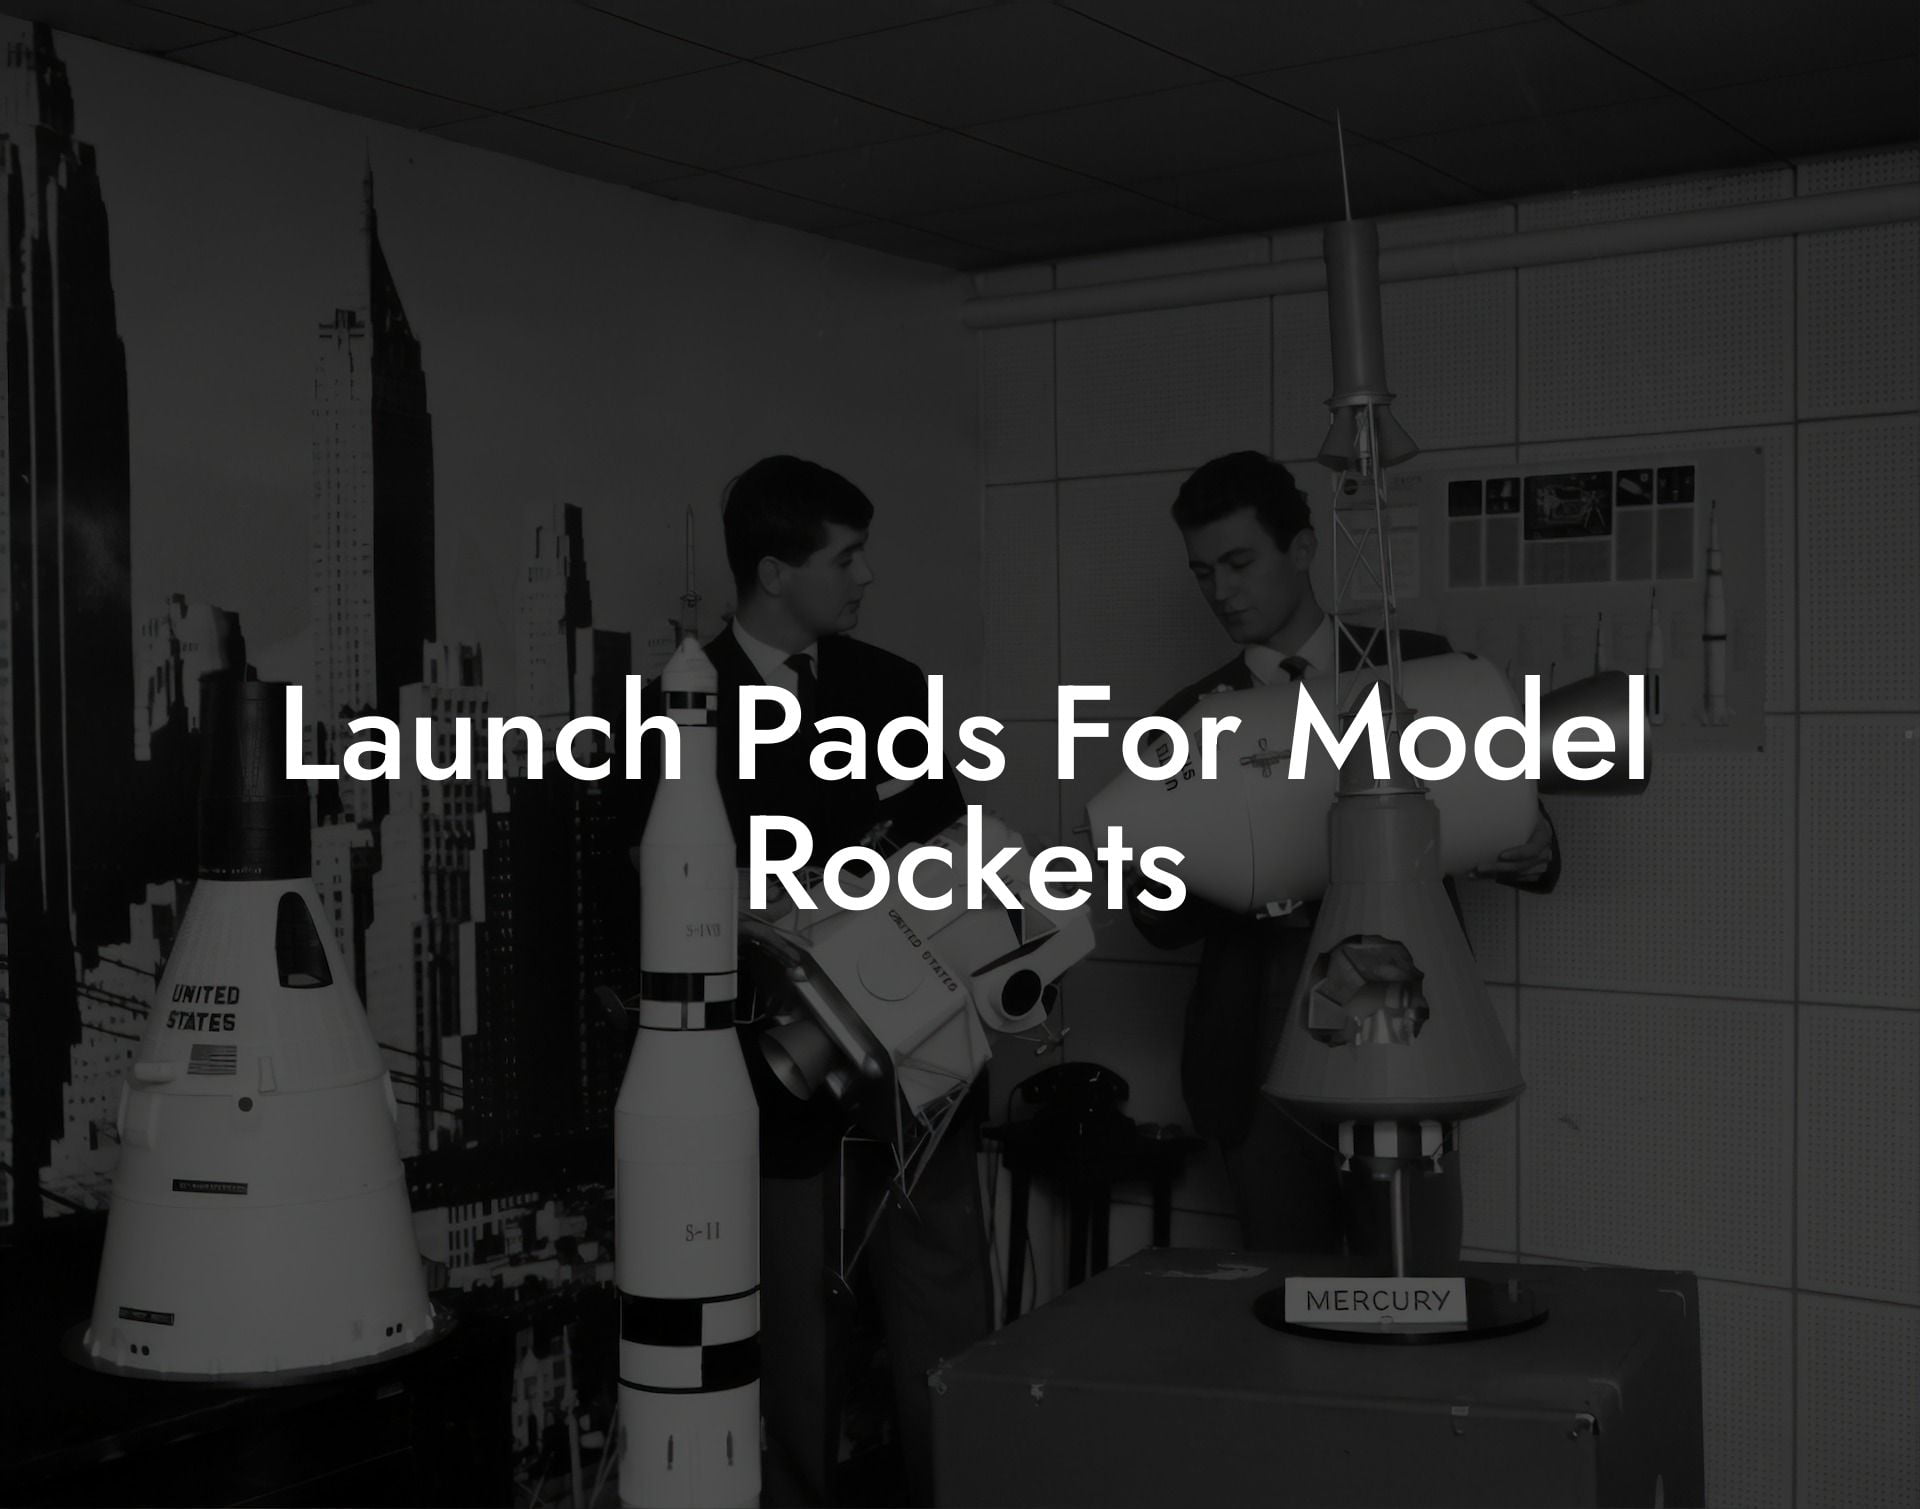 Launch Pads For Model Rockets